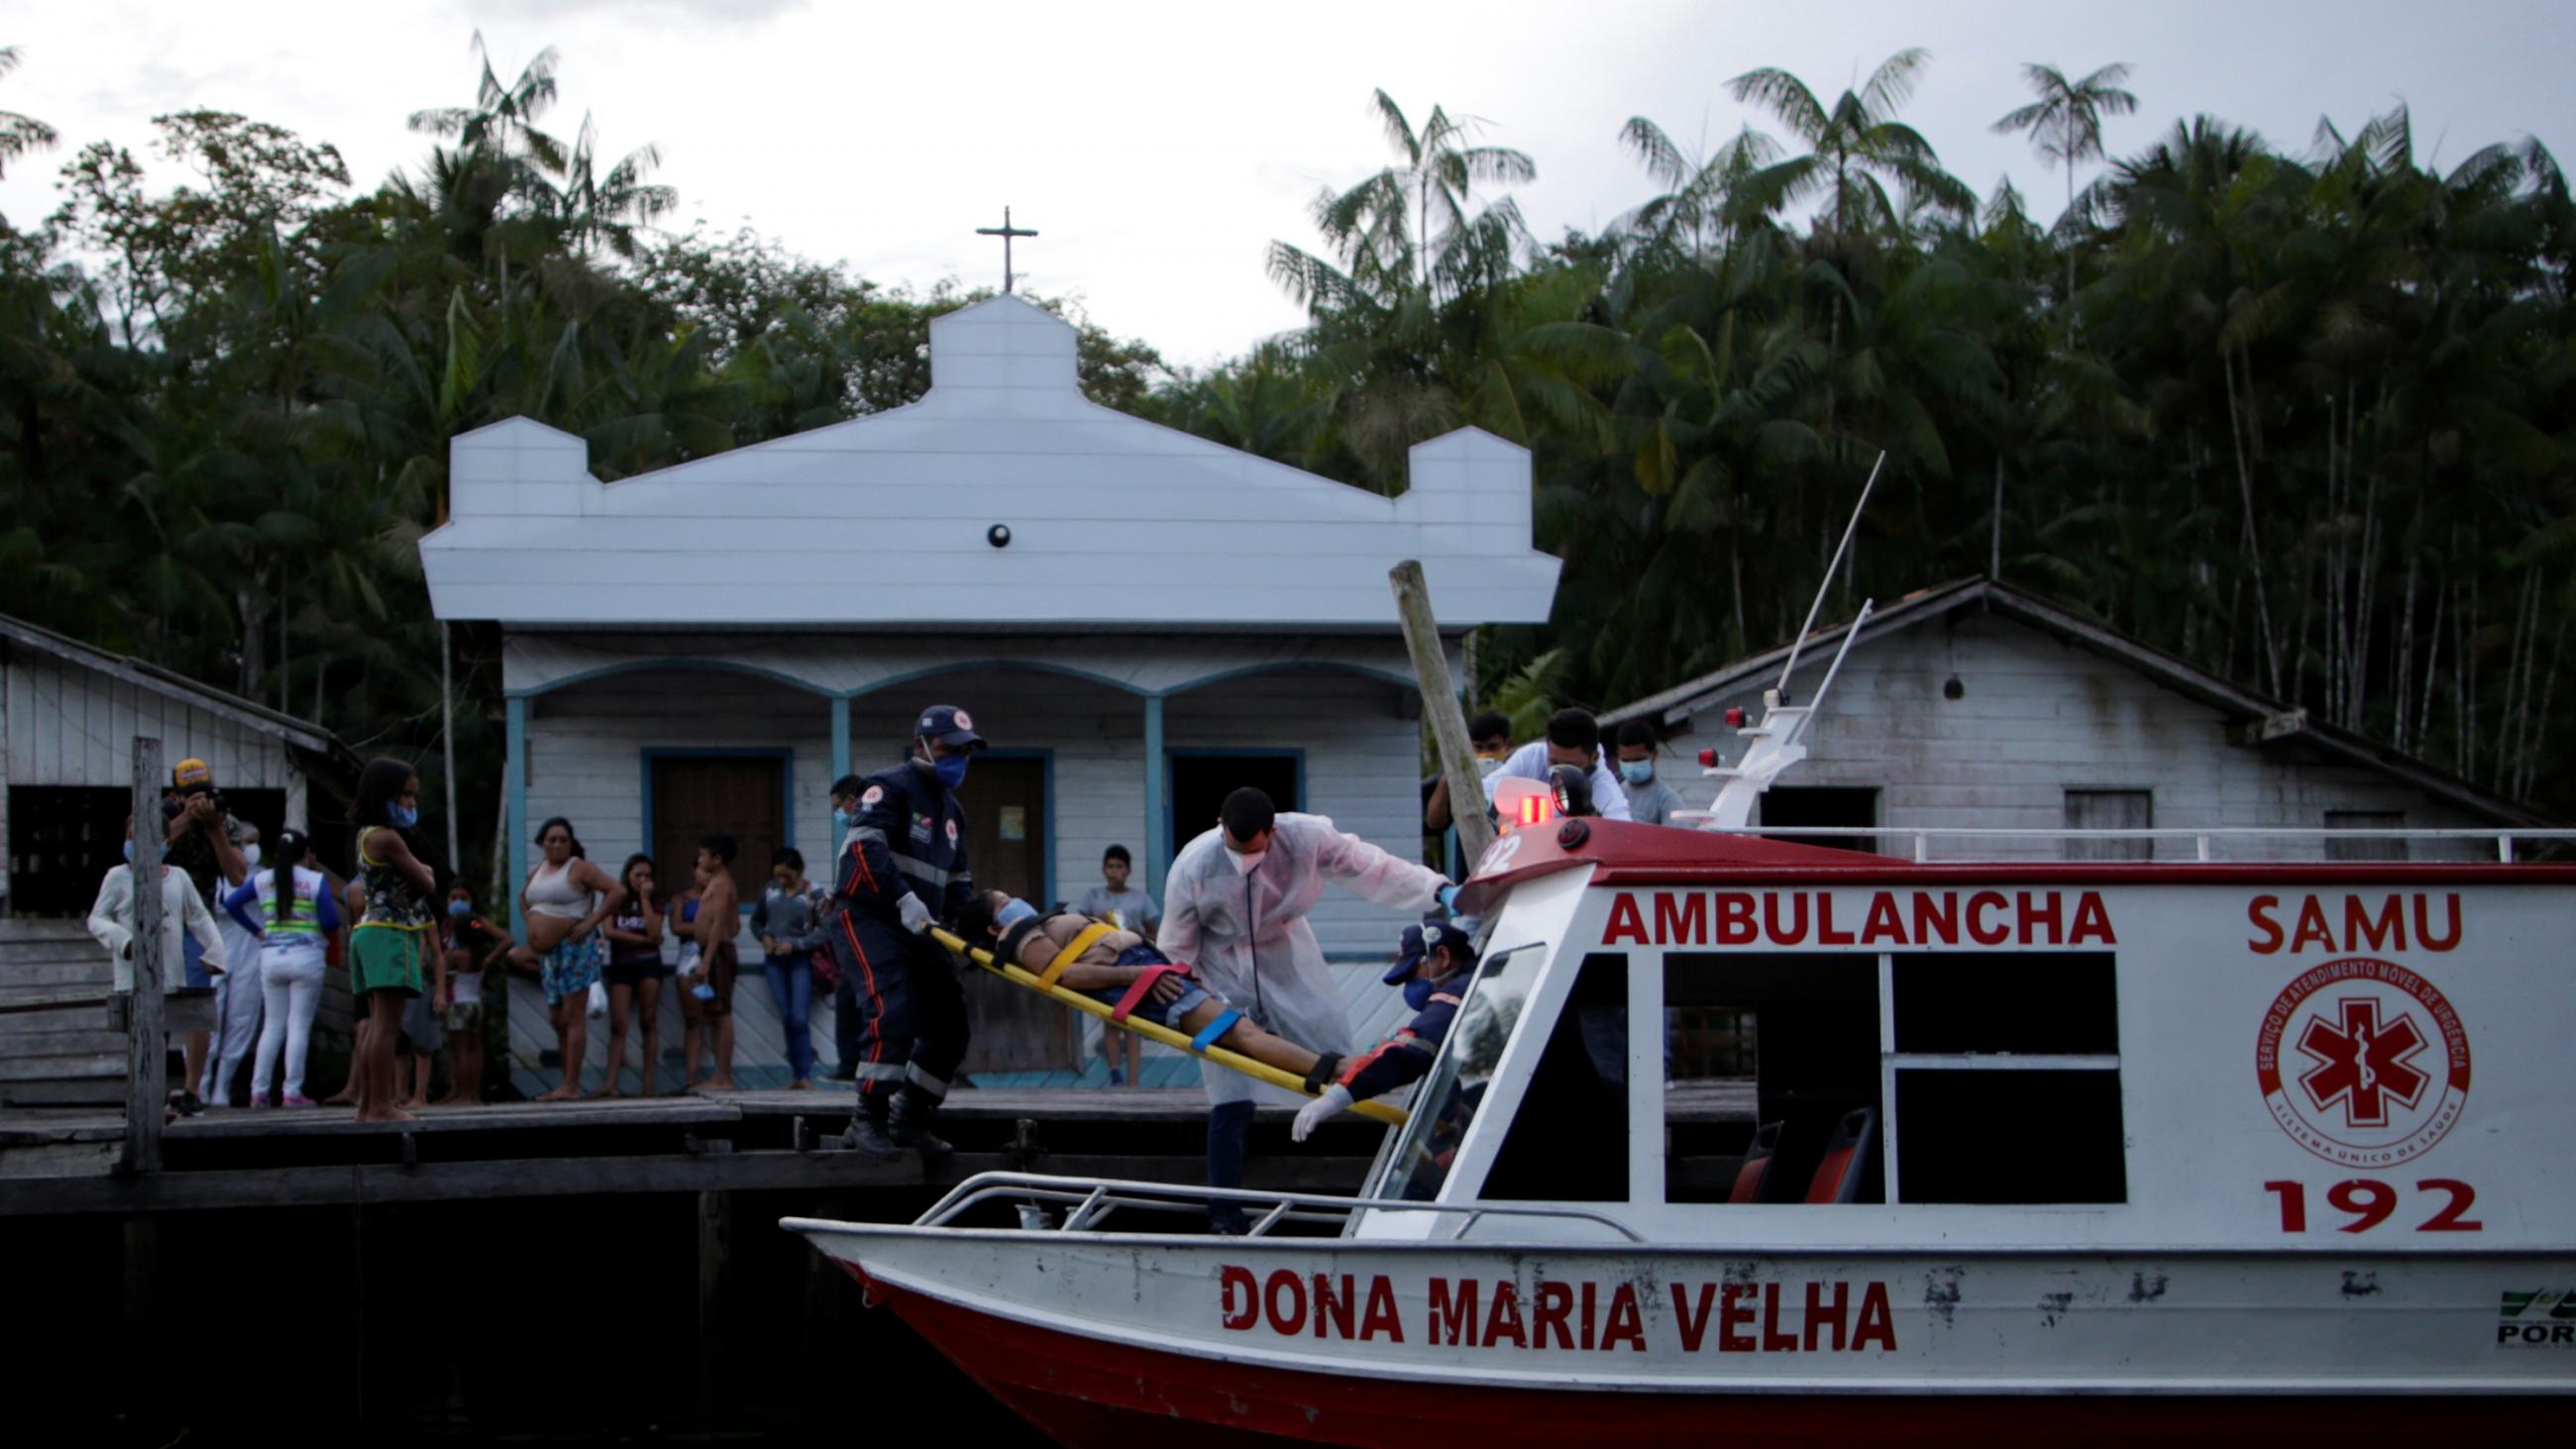 The photo shows a riverboat painted in ambulance colors docked at a river stop at dusk to complete the transfer with numerous onlookers.